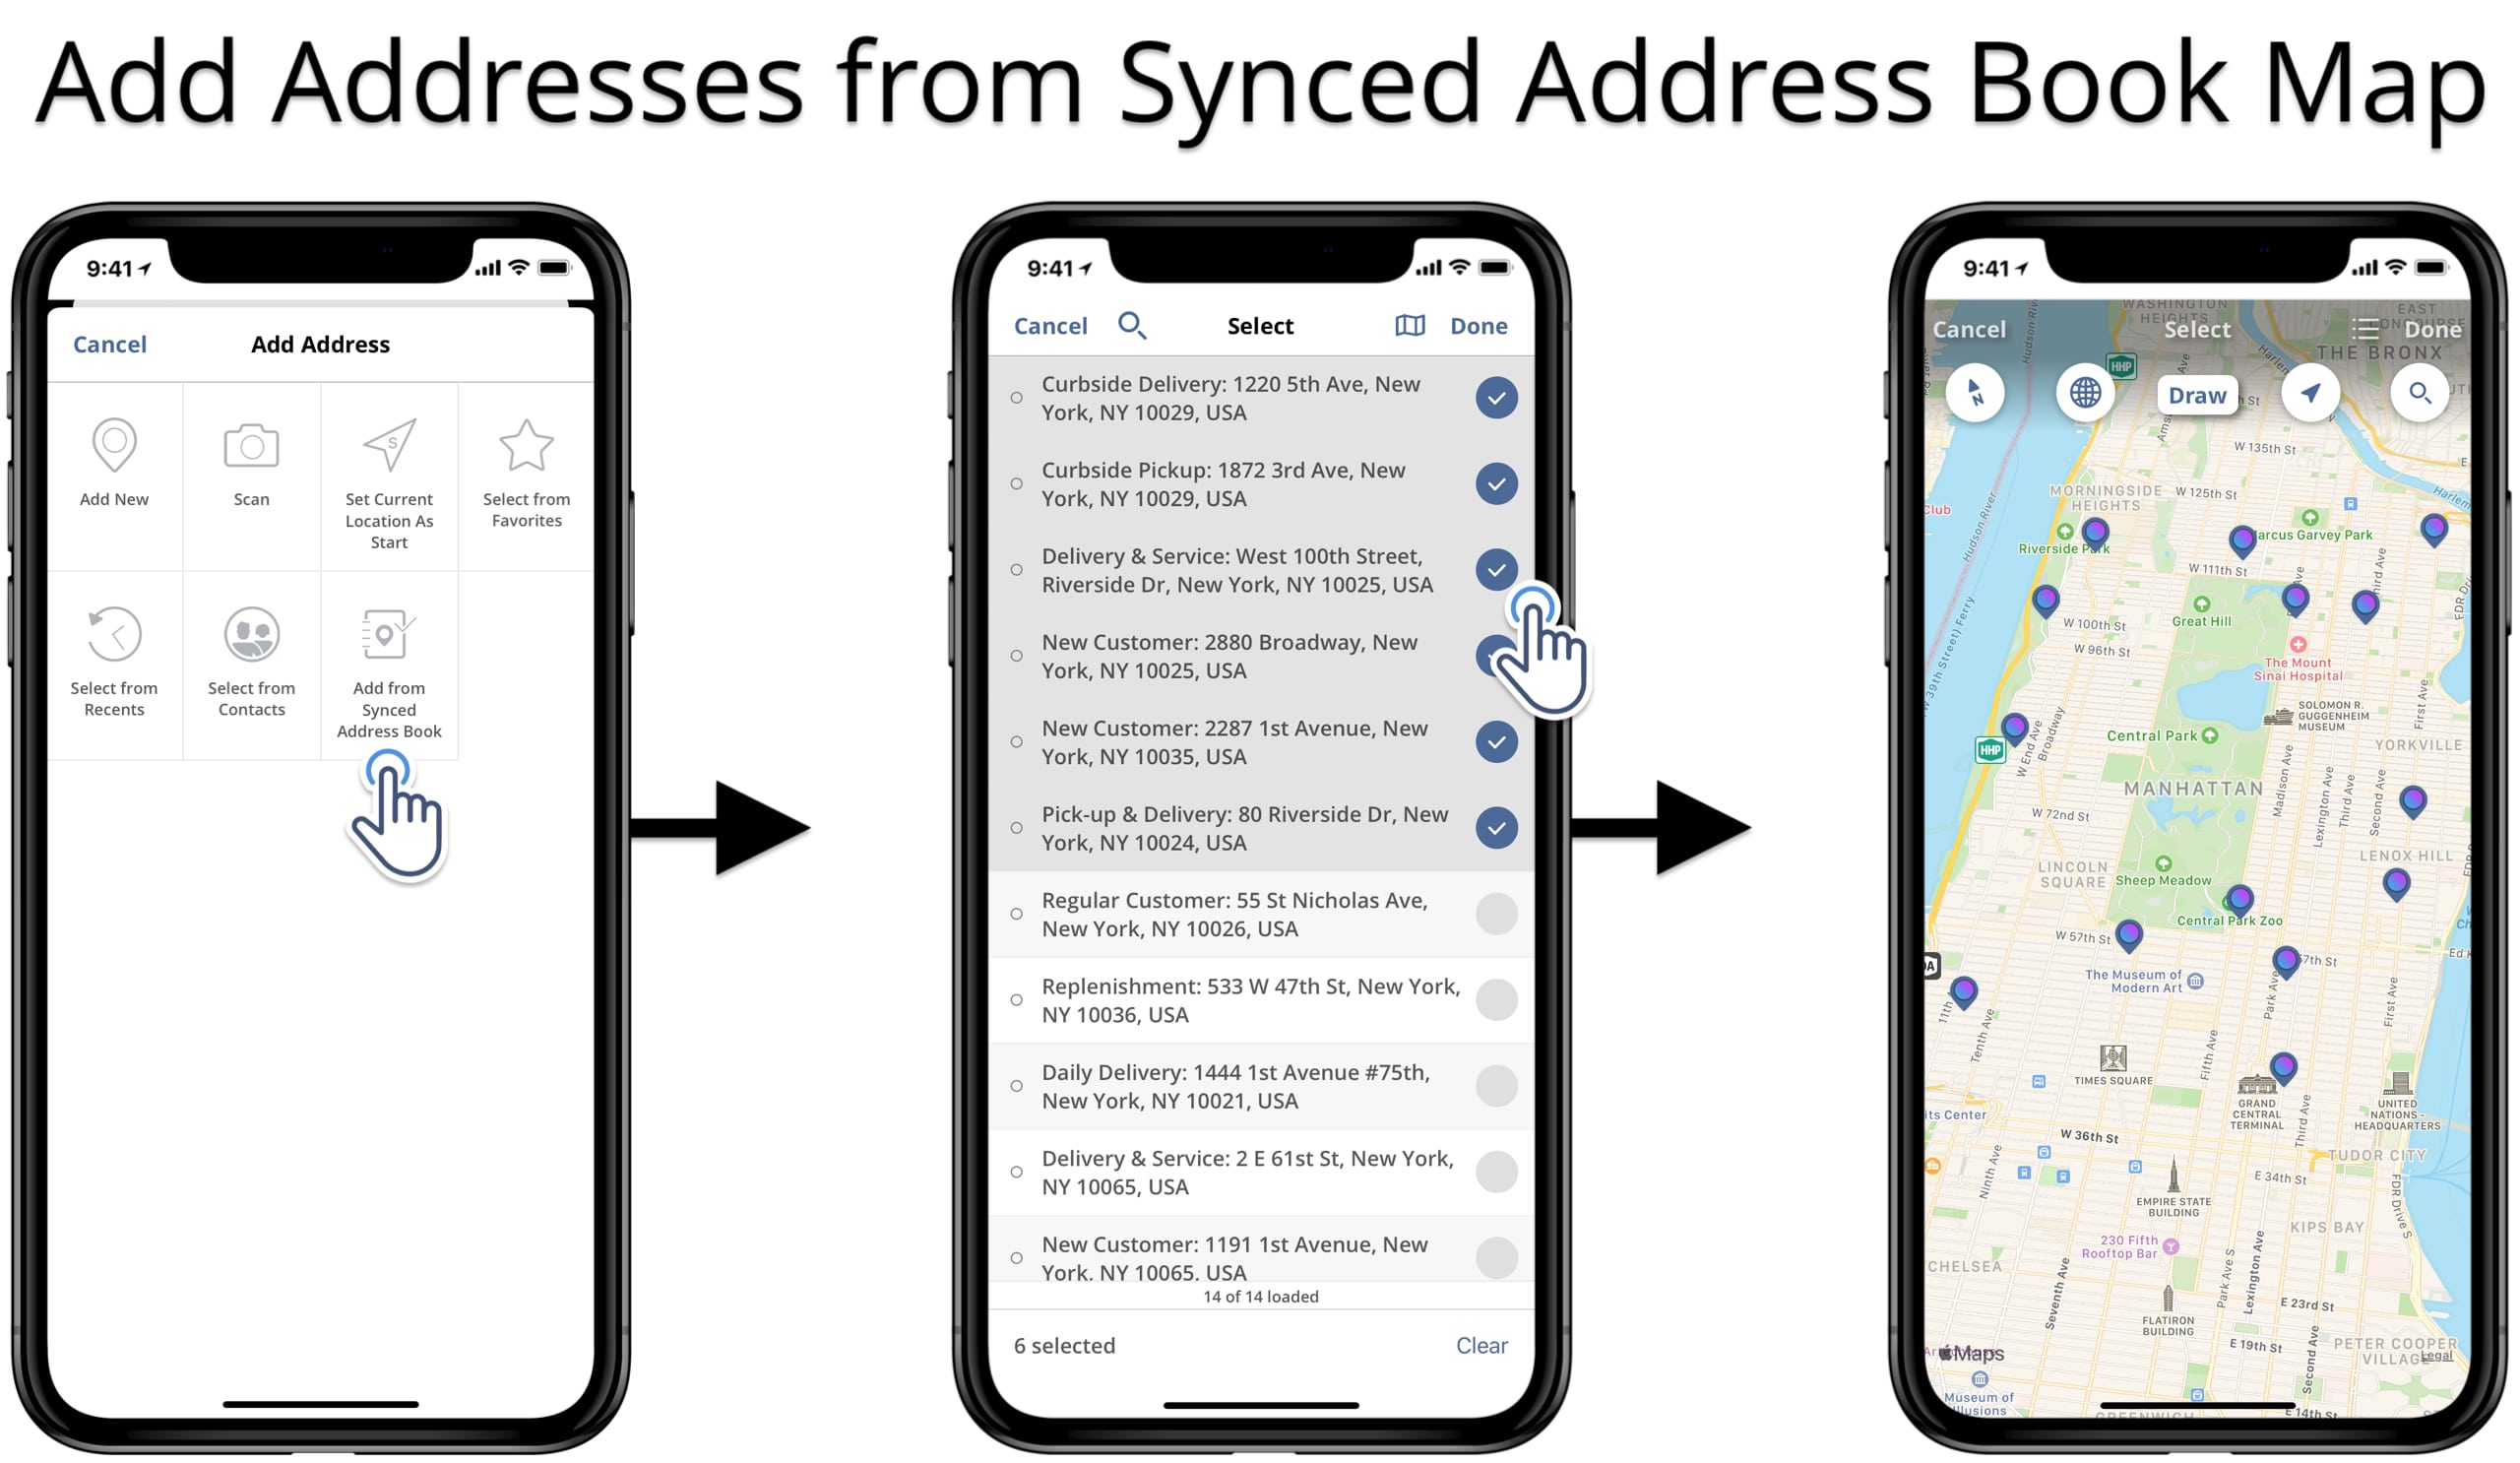 Adding destinations to the route using addresses and contacts from the synced address book.